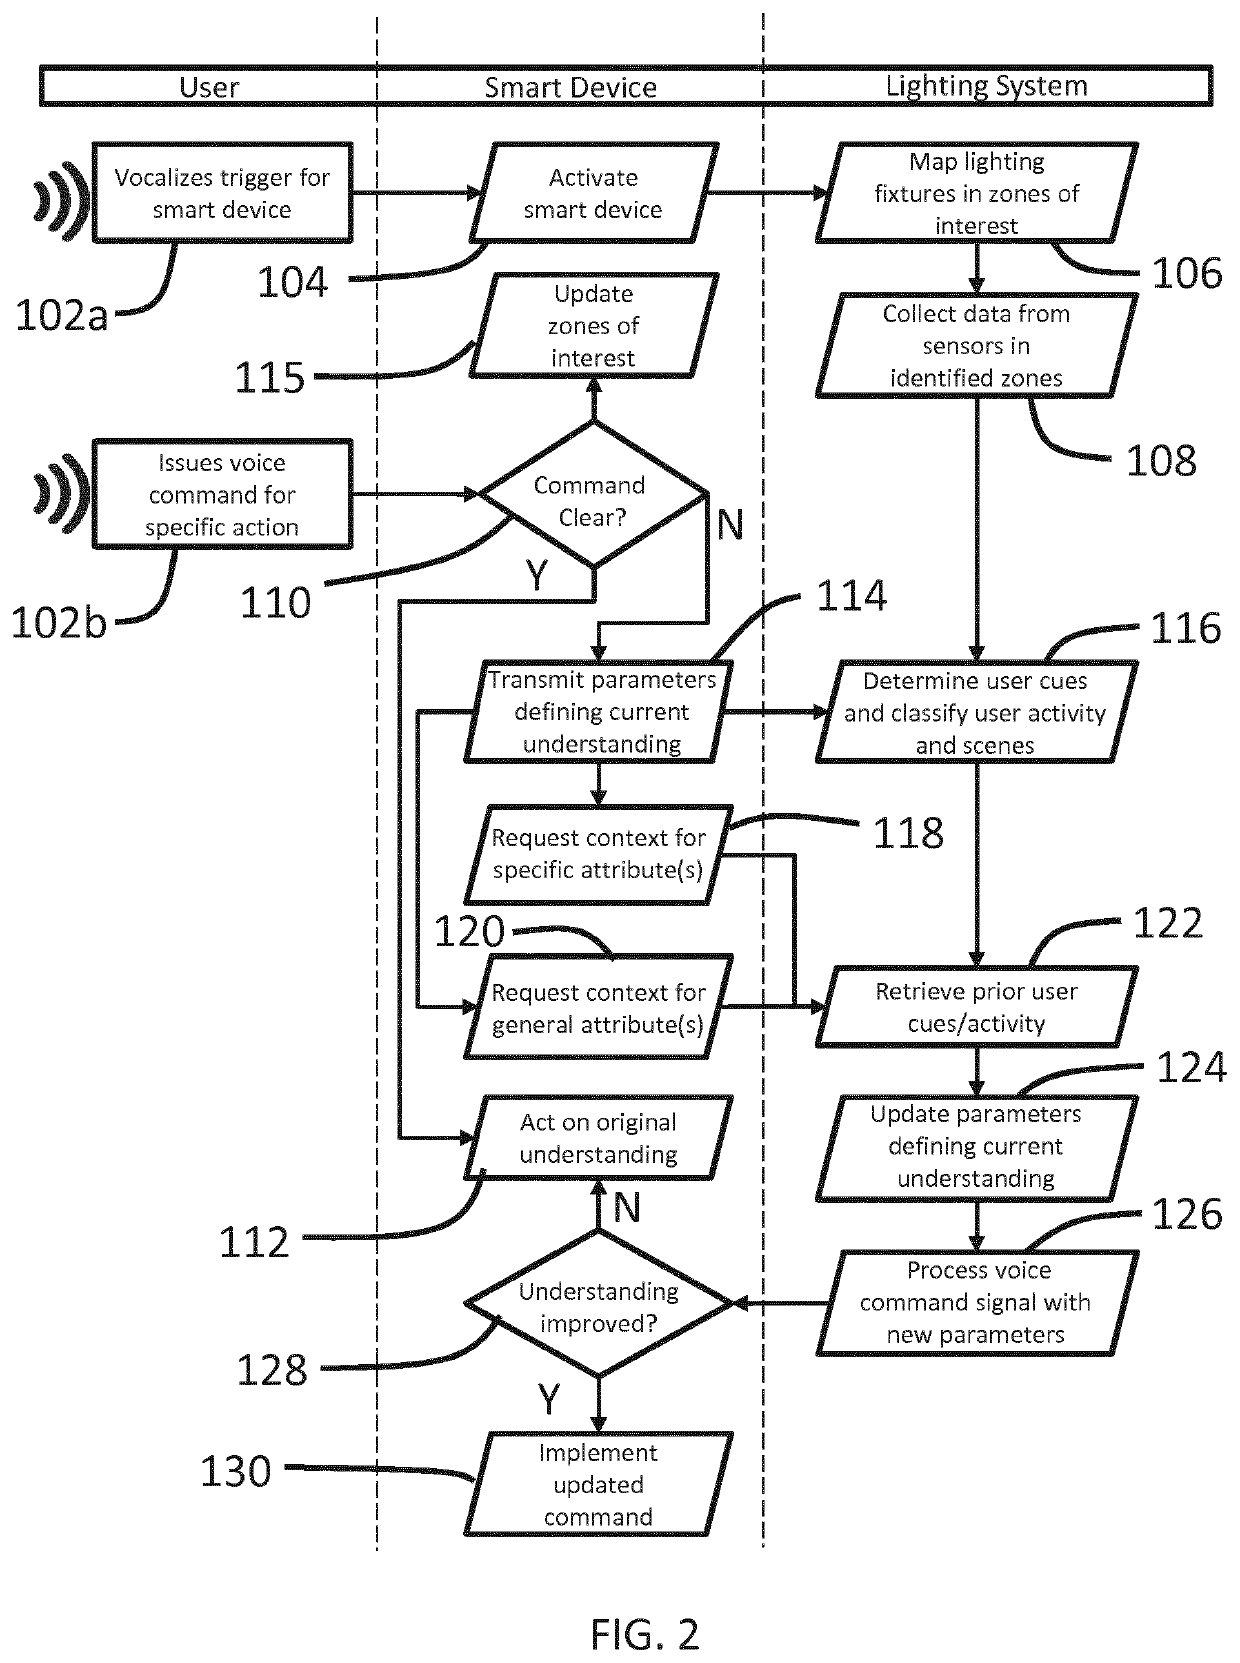 System and methods for augmenting voice commands using connected lighting systems